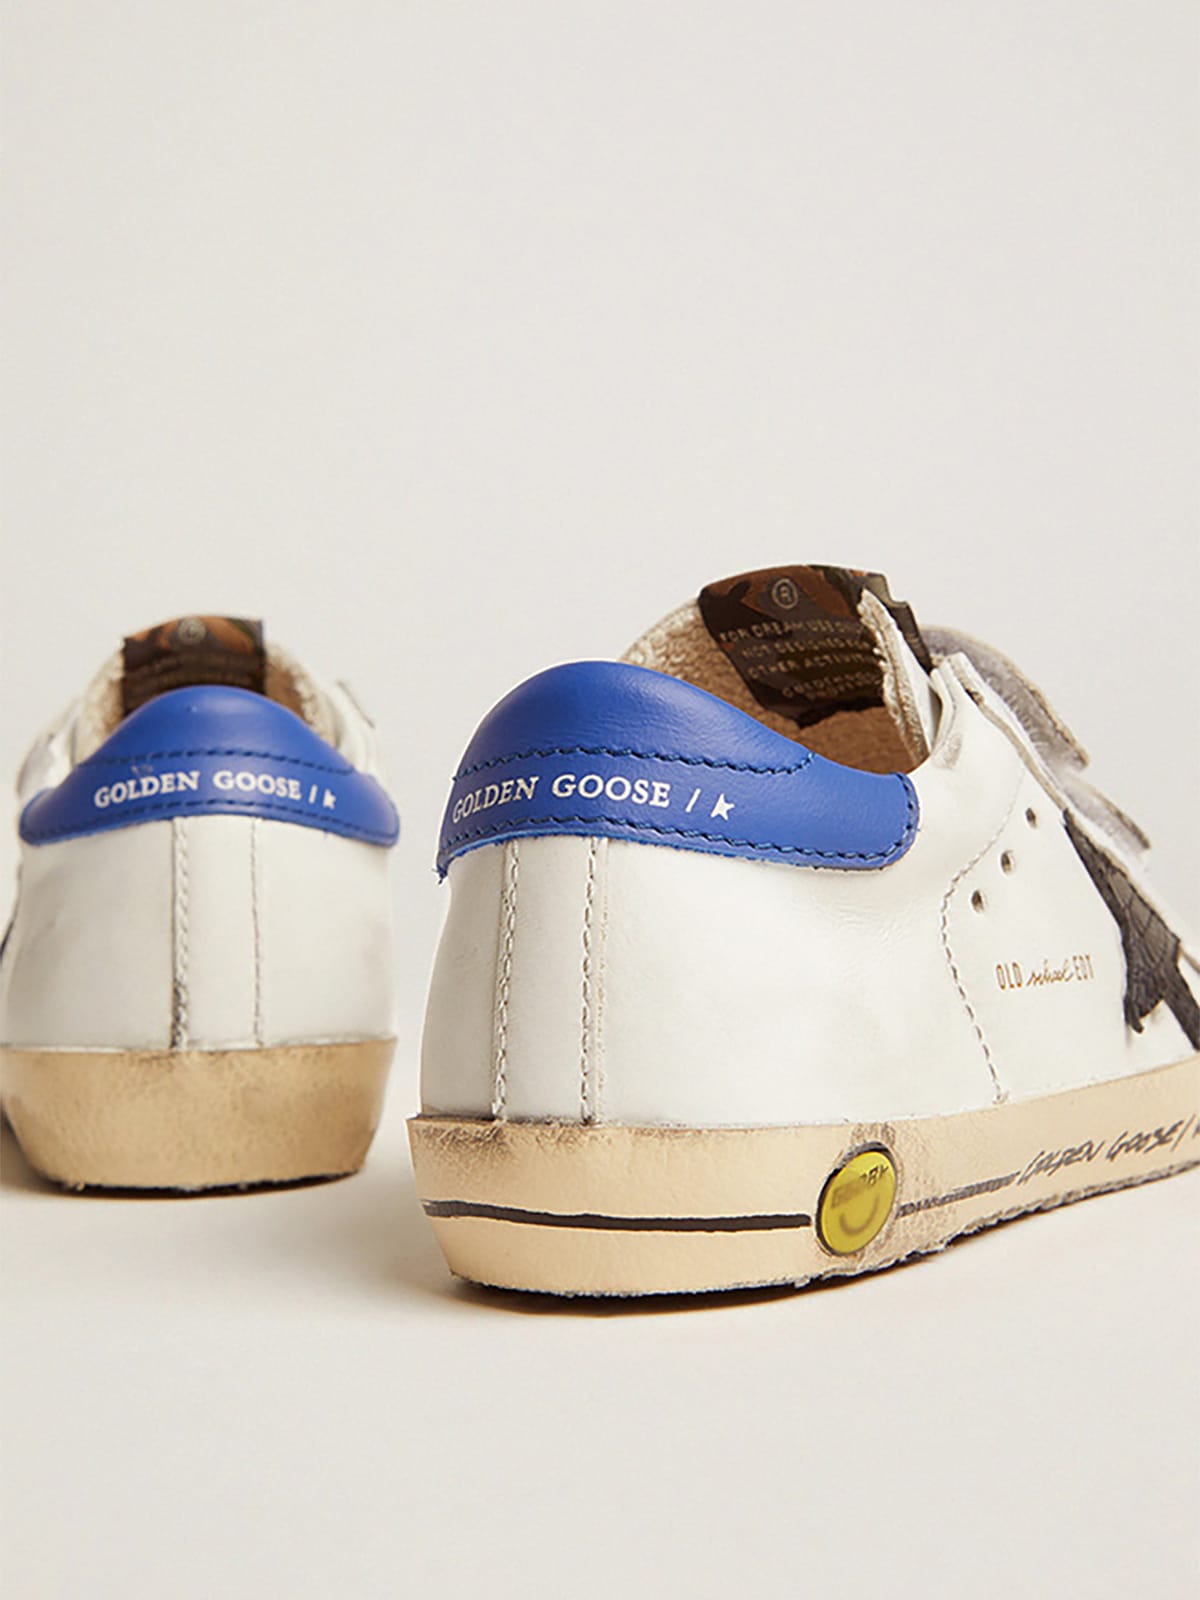 Golden Goose - Young Old School with black snake print leather star and blue heel in 